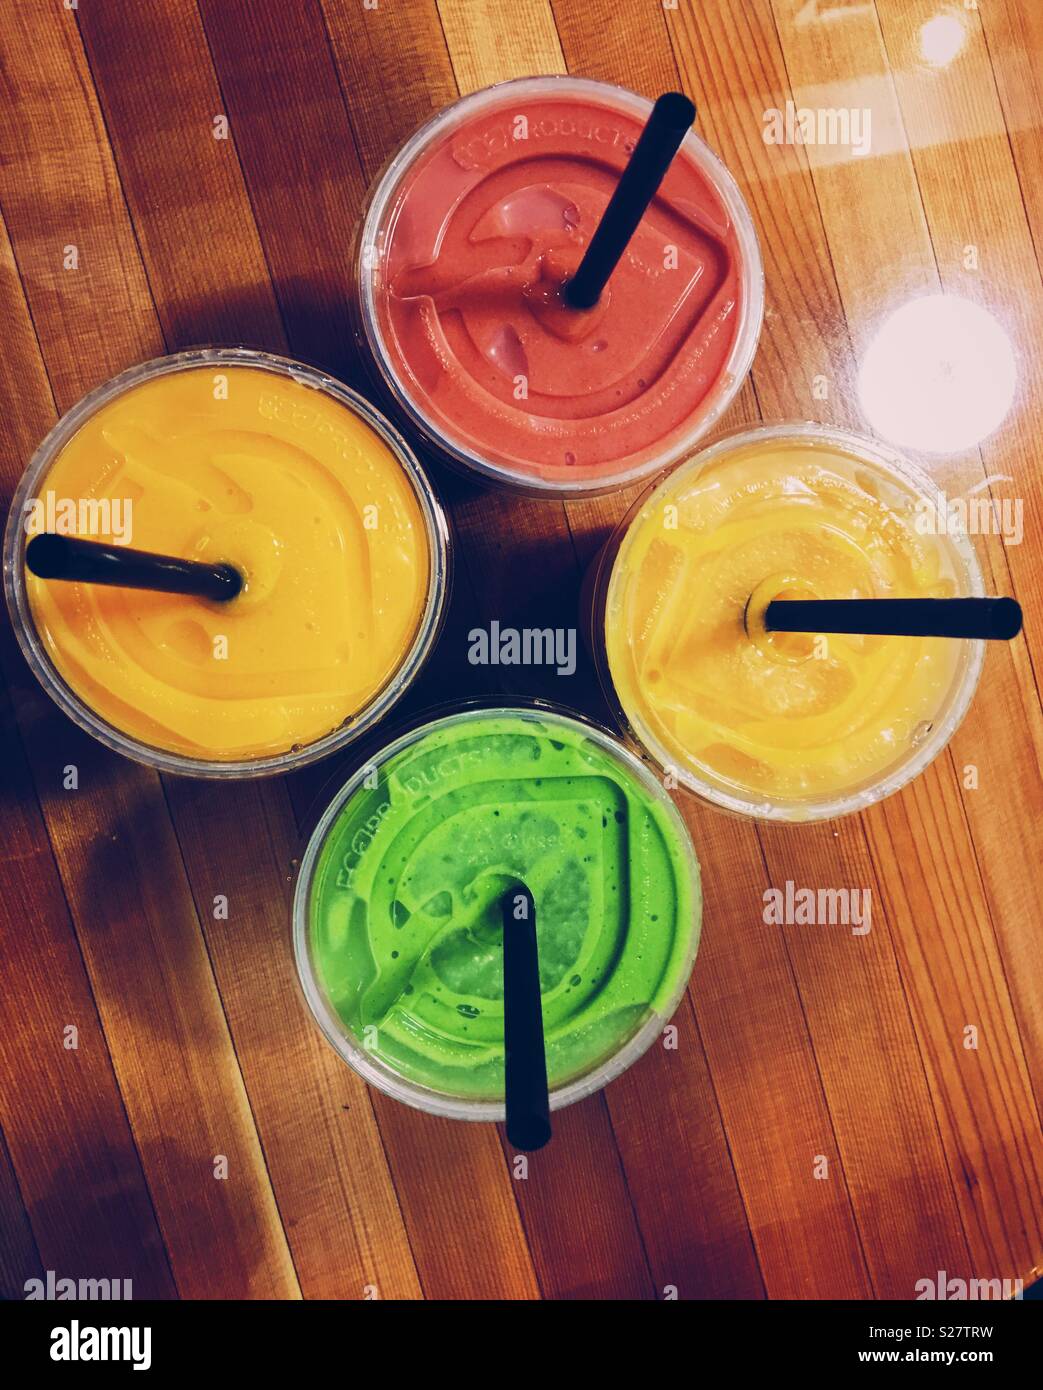 https://c8.alamy.com/comp/S27TRW/four-colourful-fruit-smoothies-in-plastic-cups-with-plastic-straws-on-a-wooden-table-photographed-from-above-S27TRW.jpg